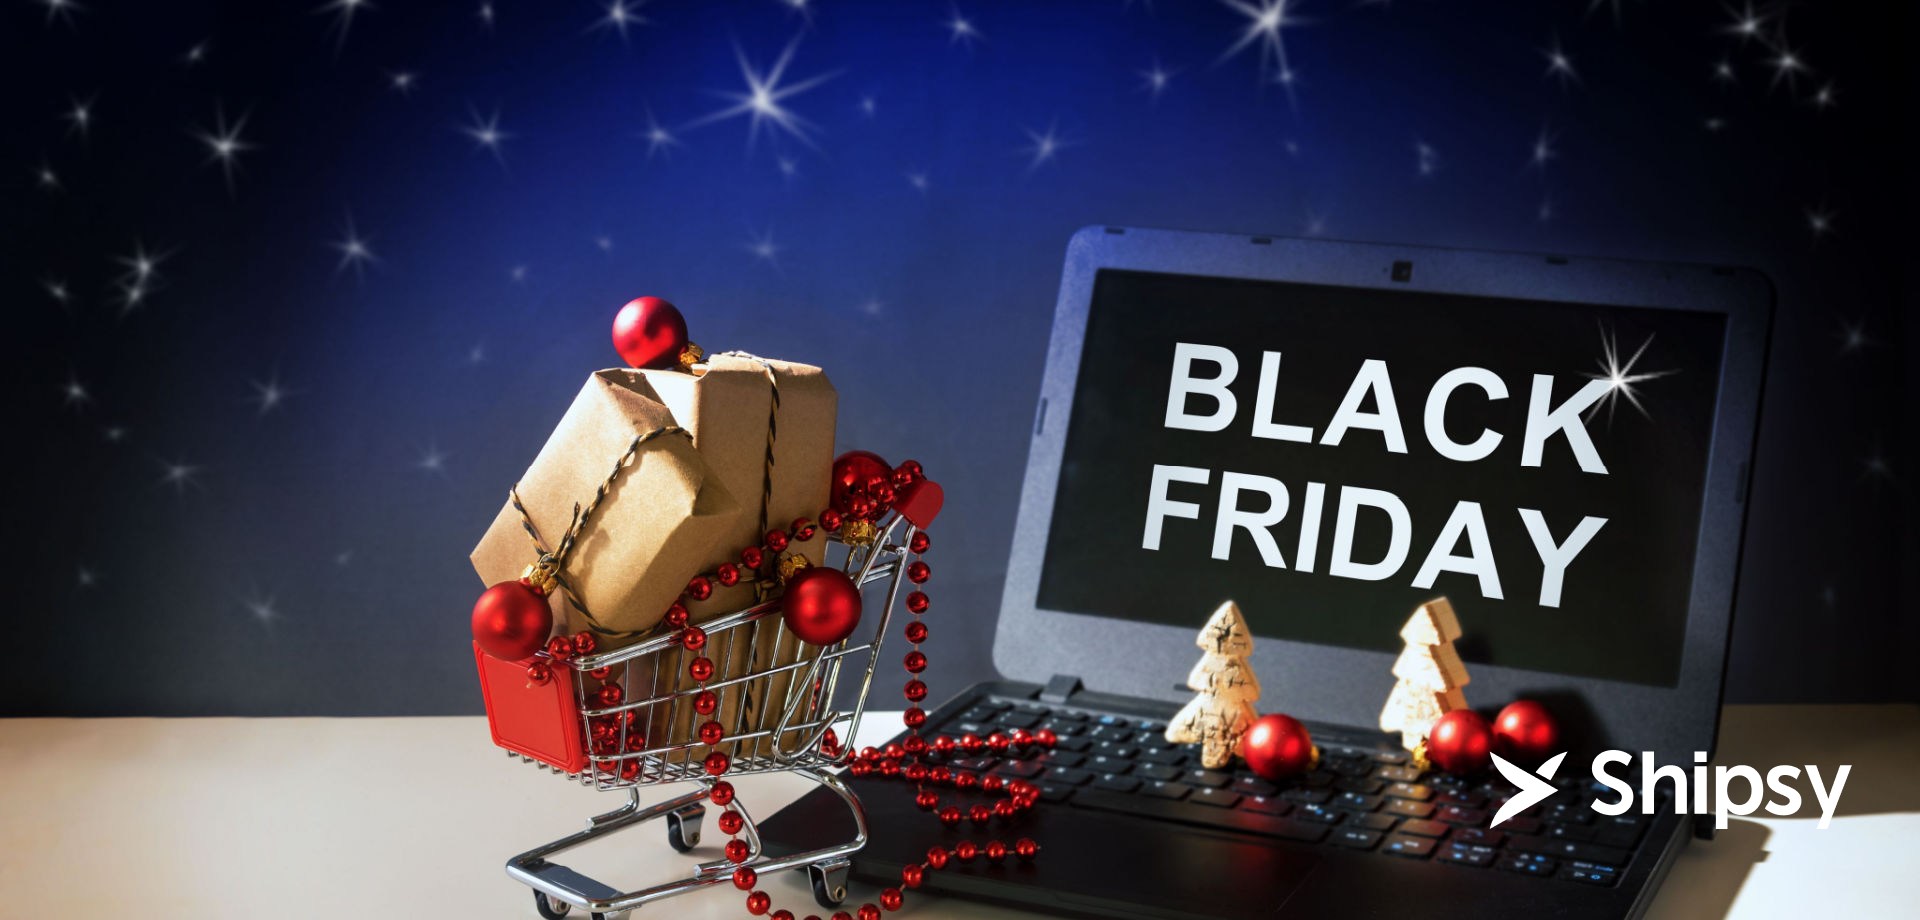 Black Friday Sales: Four Amazing Ways to Drive Delightful and Scalable Last Mile Deliveries